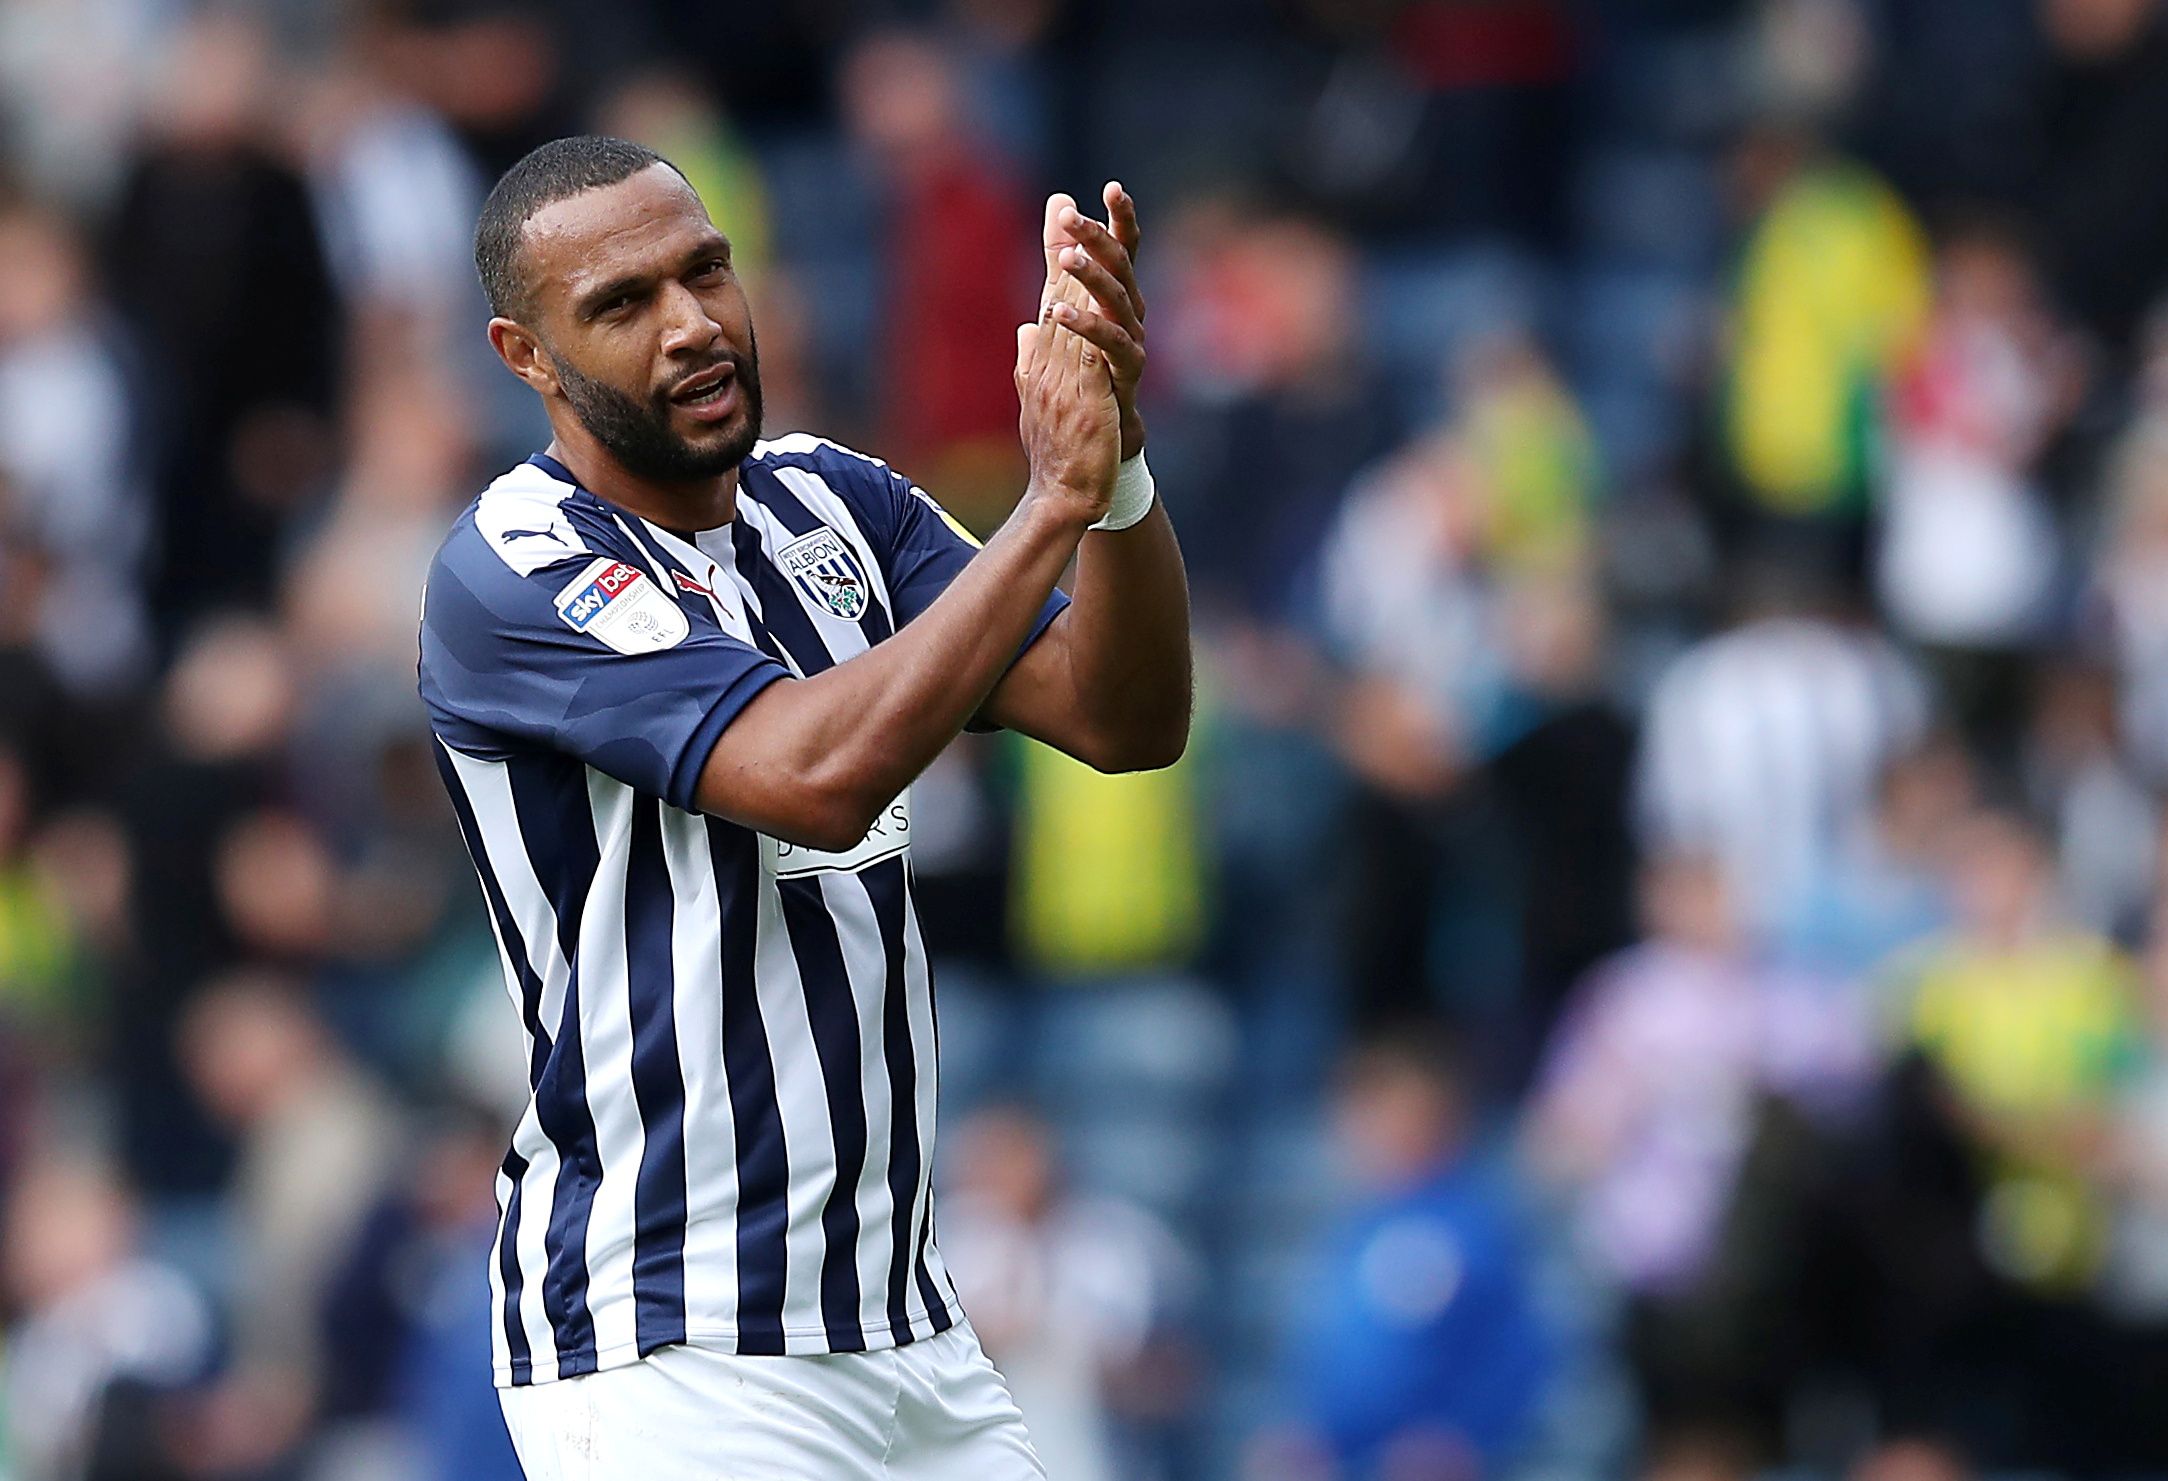 Soccer Football - Championship - West Bromwich Albion v Blackburn Rovers - The Hawthorns, West Bromwich, Britain - August 31, 2019   West Bromwich Albion's Matt Phillips applauds fans after the match      Action Images/John Clifton    EDITORIAL USE ONLY. No use with unauthorized audio, video, data, fixture lists, club/league logos or 